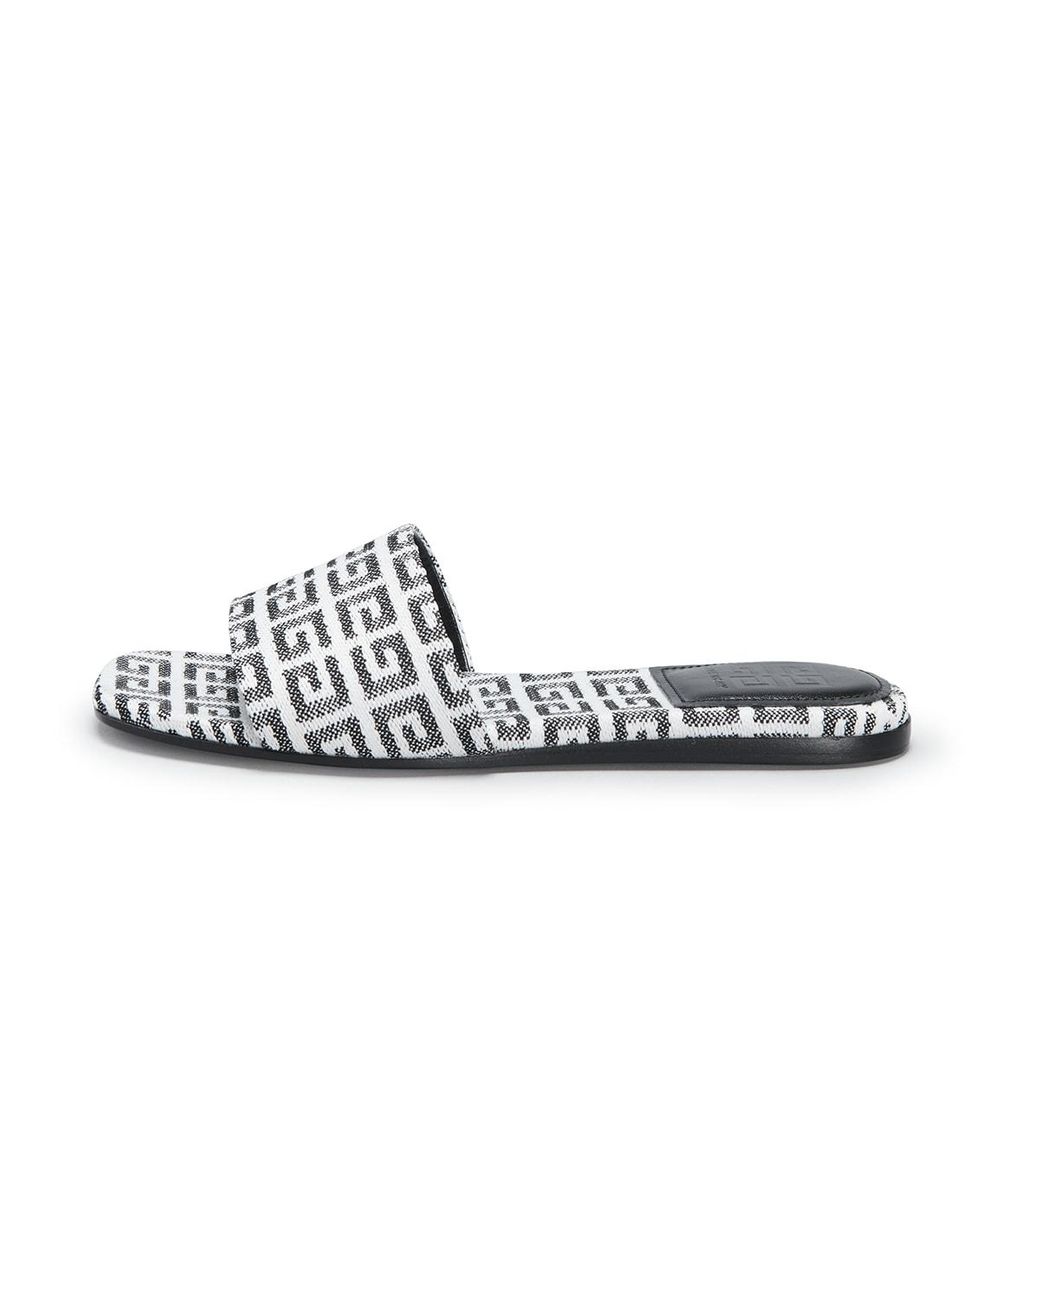 Givenchy 4g Monogram Flat Mule Sandals in White | Lyst